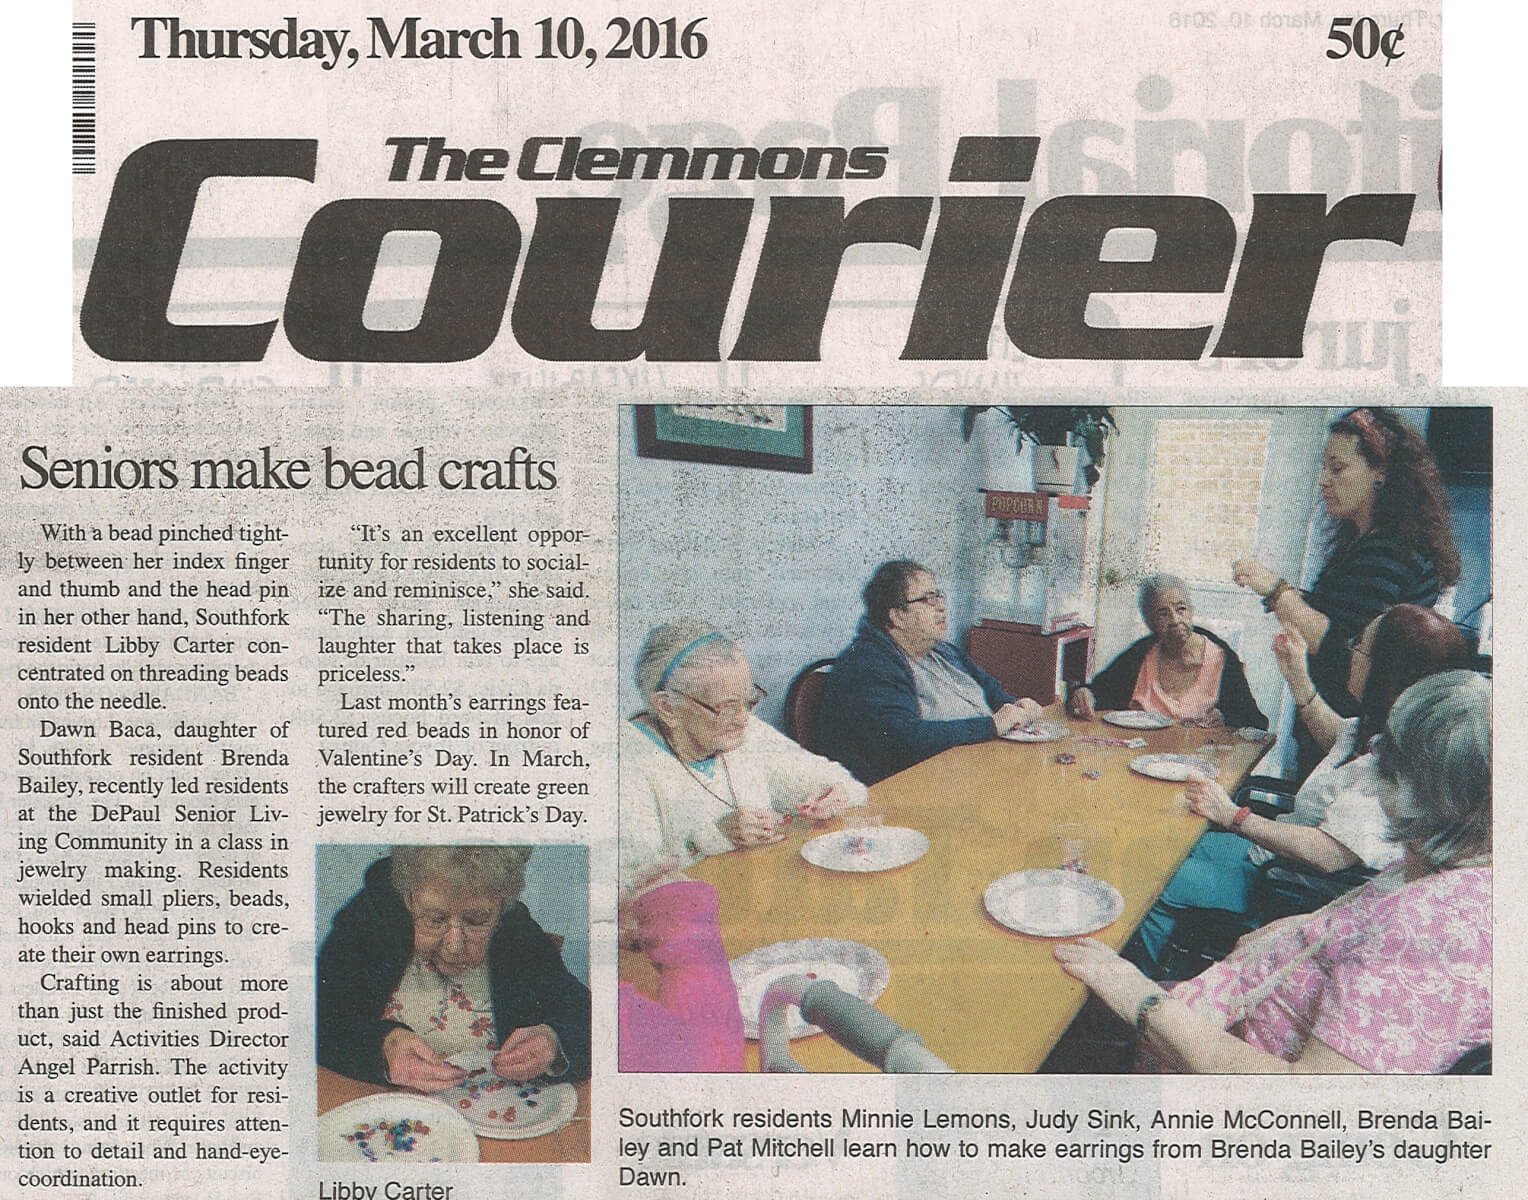 Southfork residents make Earrings story in the Clemmons Courier March 10, 2016